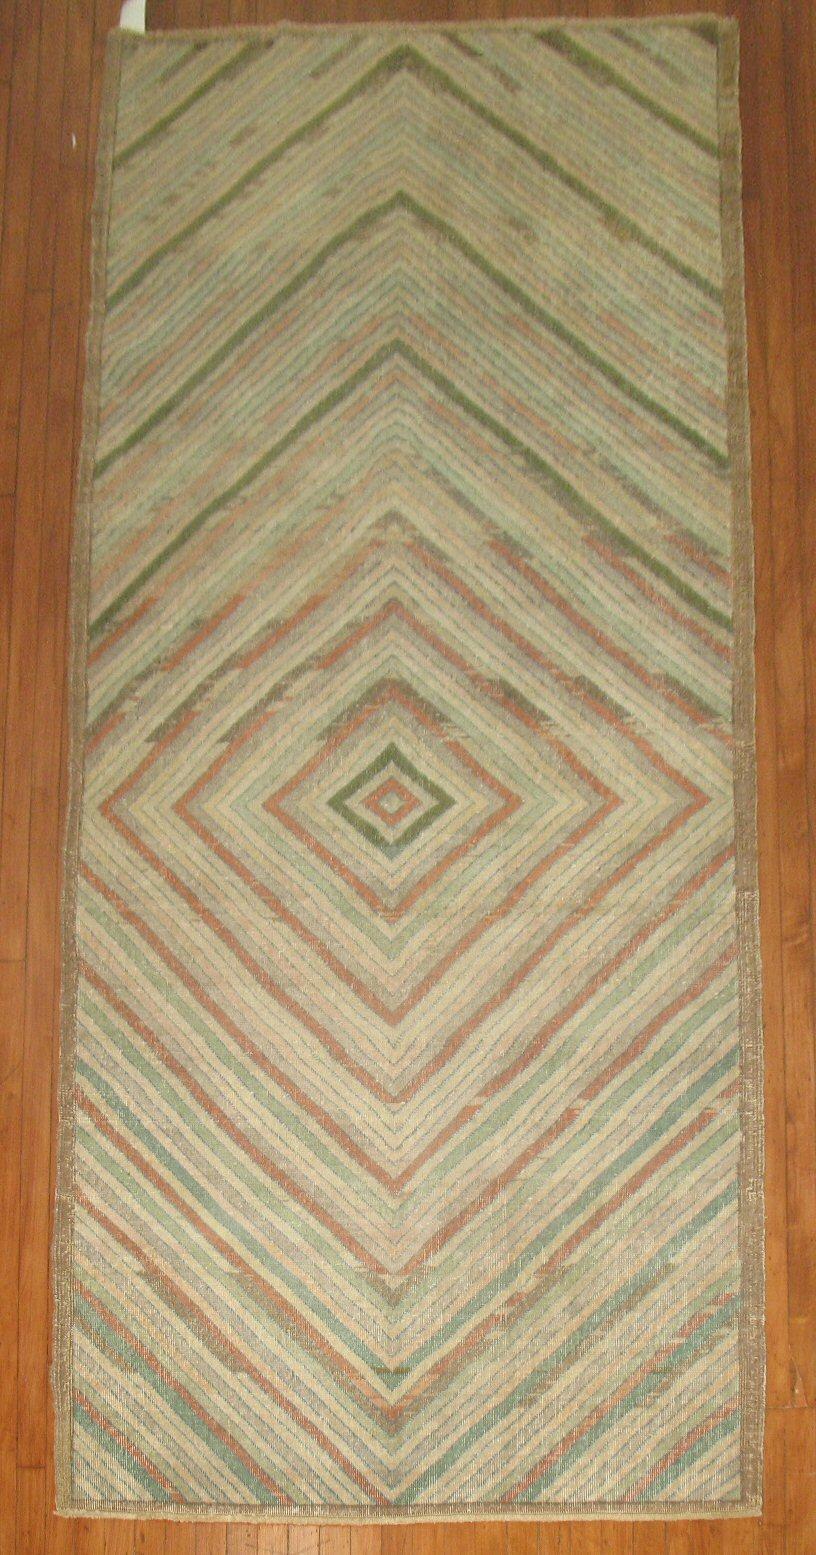 A one of a kind midcentury Turkish Deco rug in soft green, apricot, beige, brown and off-white accents.

Size: 4'5